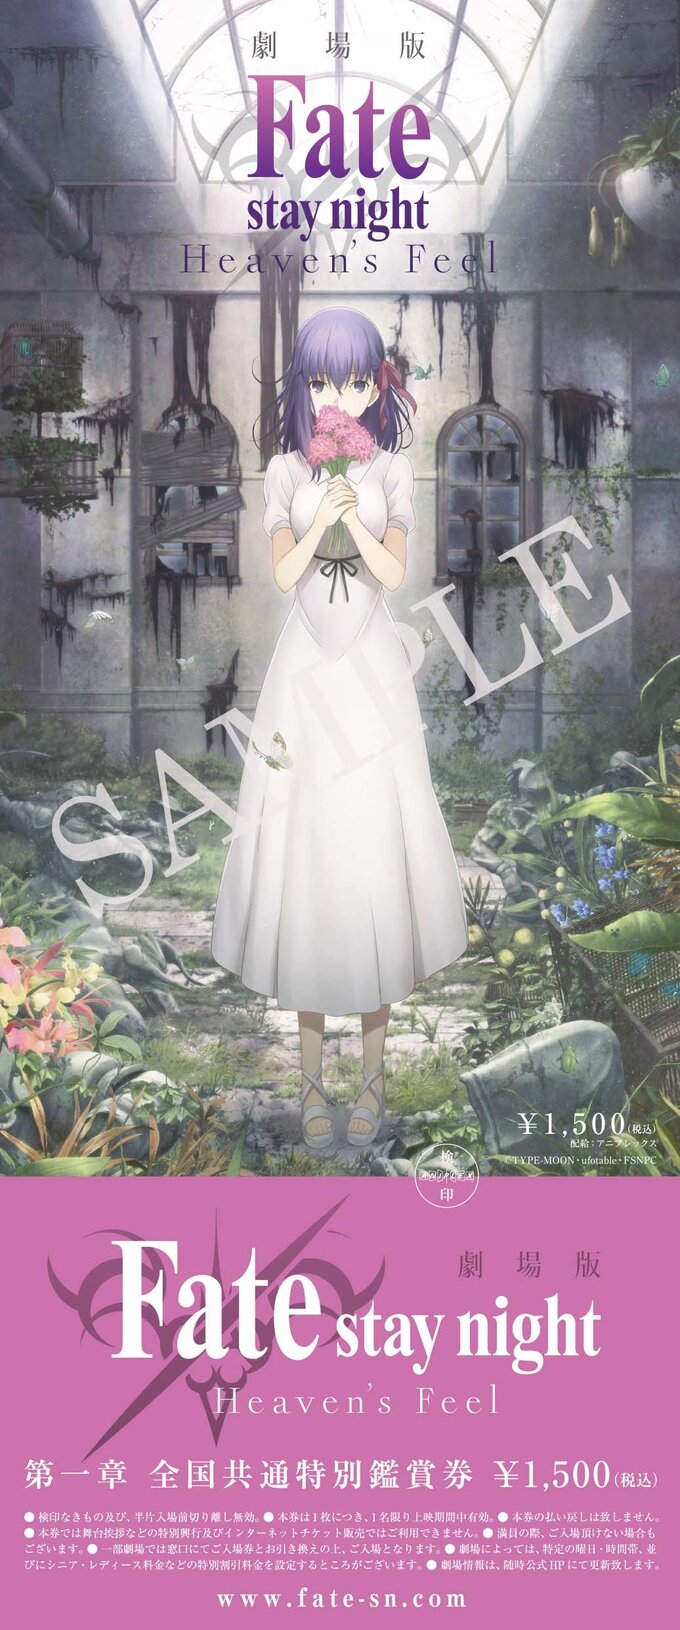 Saber Appears in New Fate/stay night: Heaven's Feel Visual, Anime News